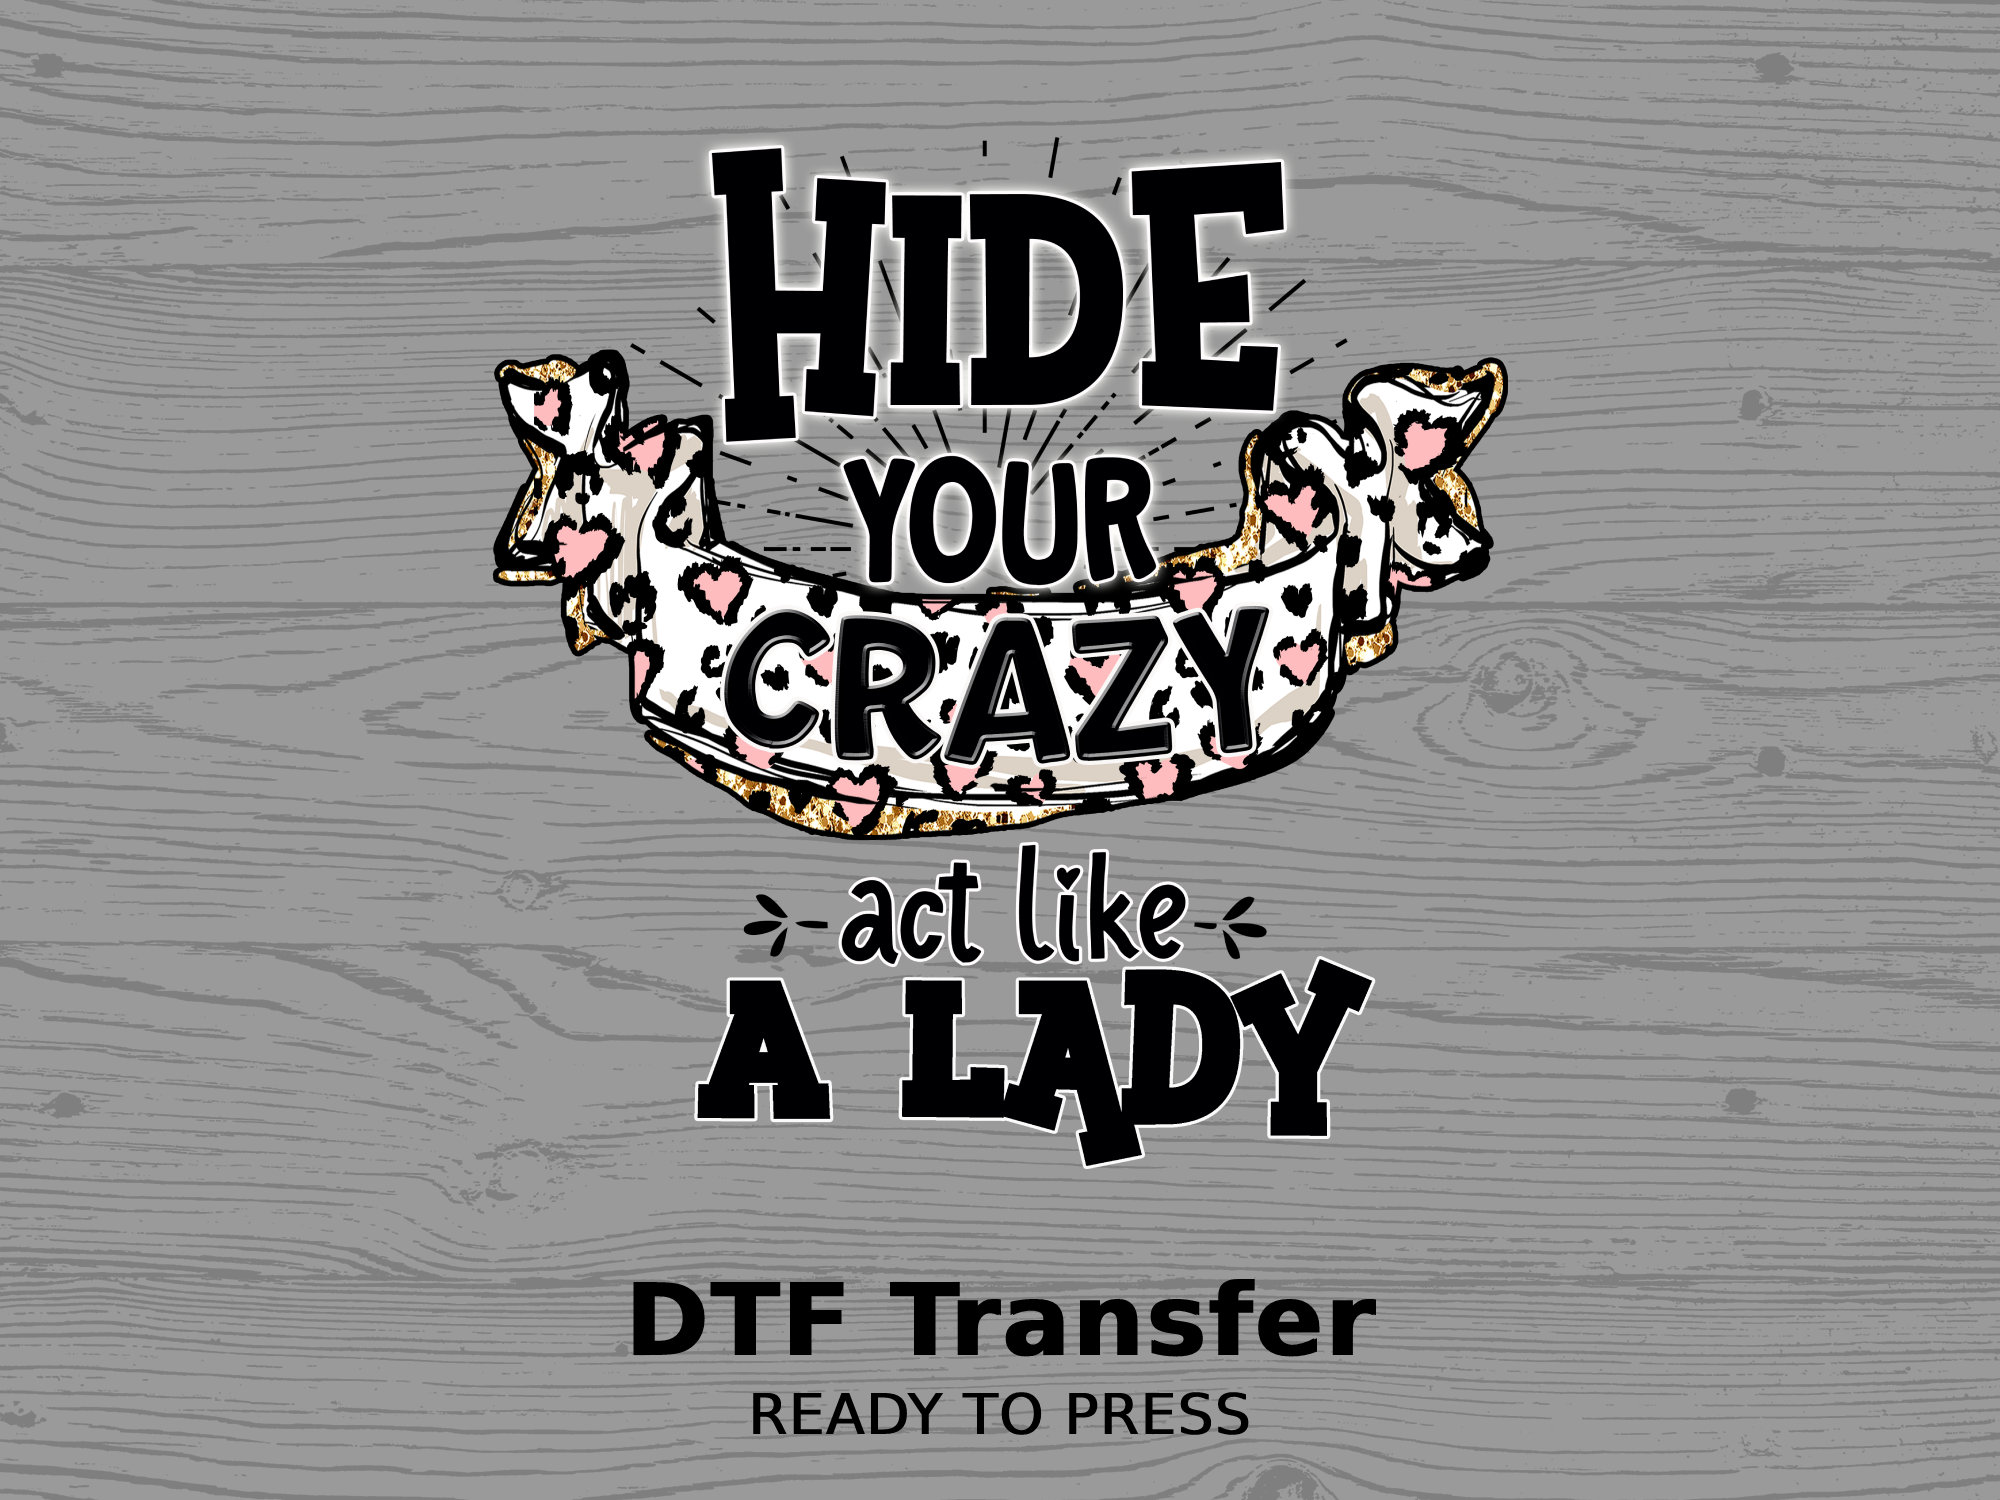 Hide Your Crazy Act Like a Lady Ready to Press Transfers 